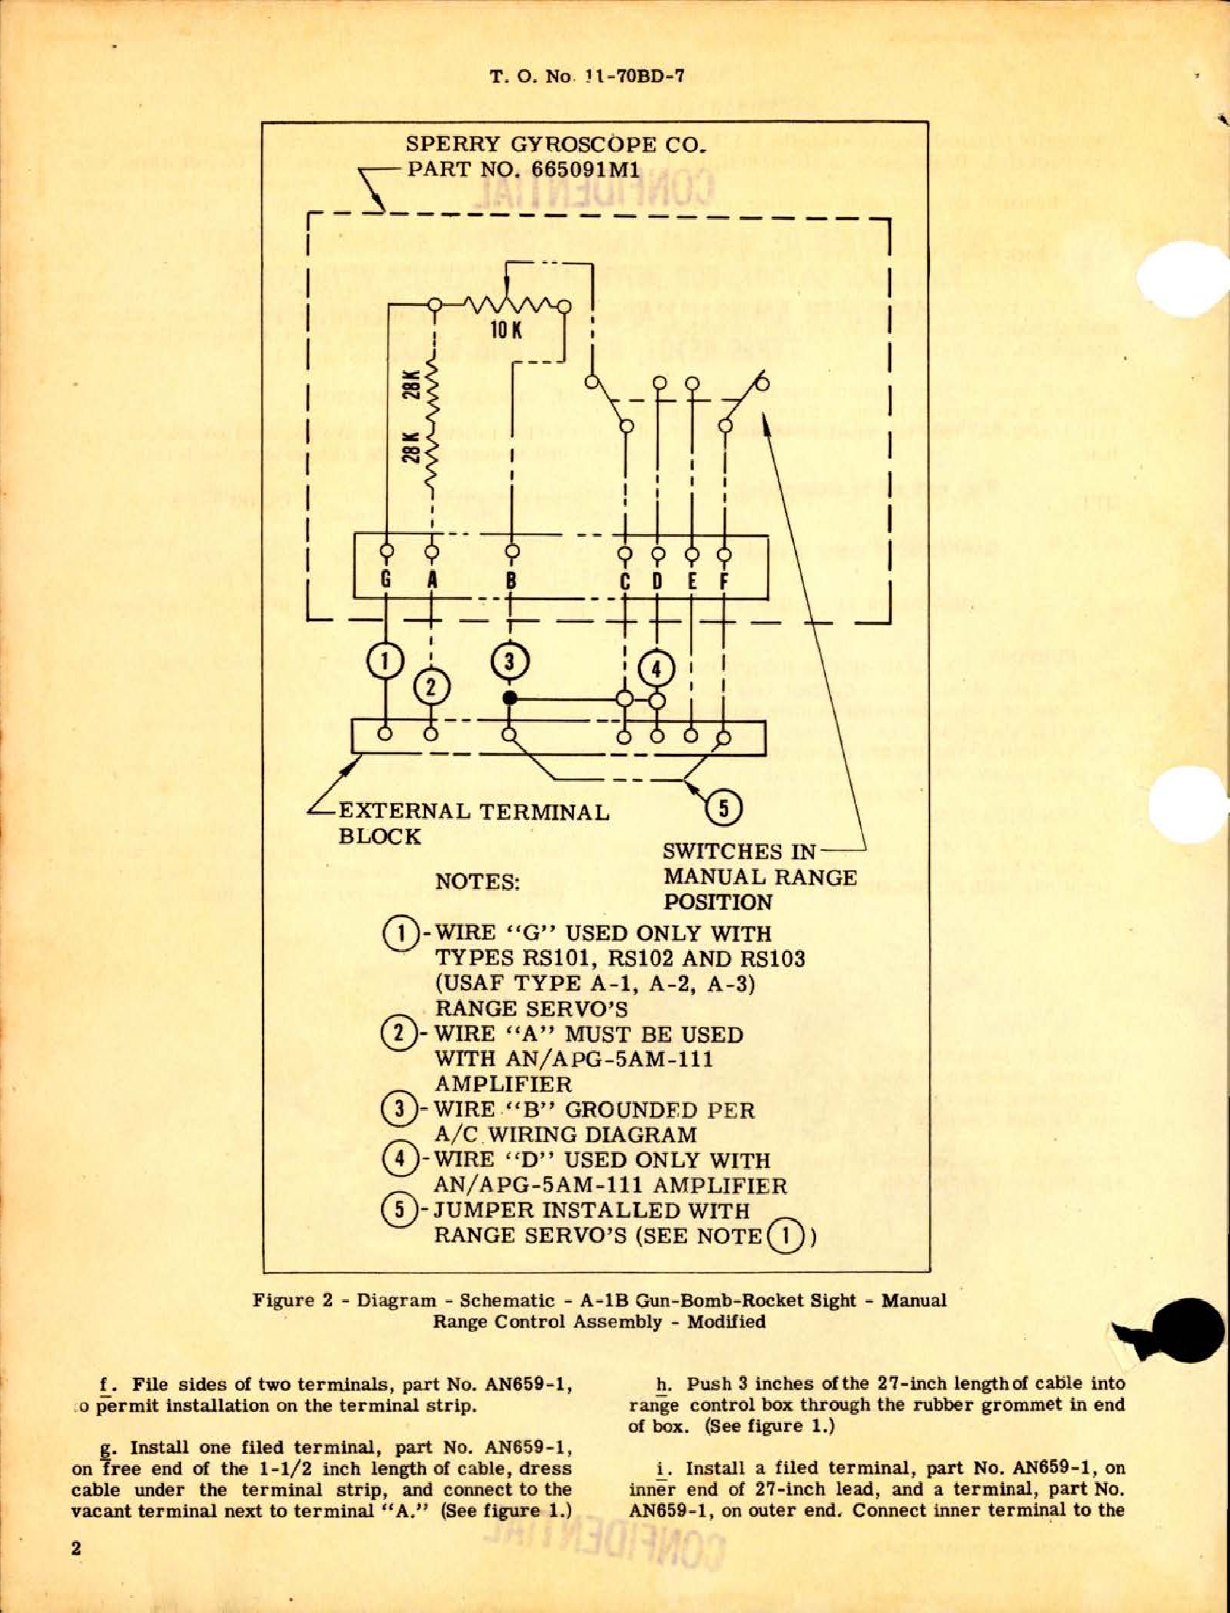 Sample page 2 from AirCorps Library document: Sperry Part No. 665091 with Servo Amplifier 